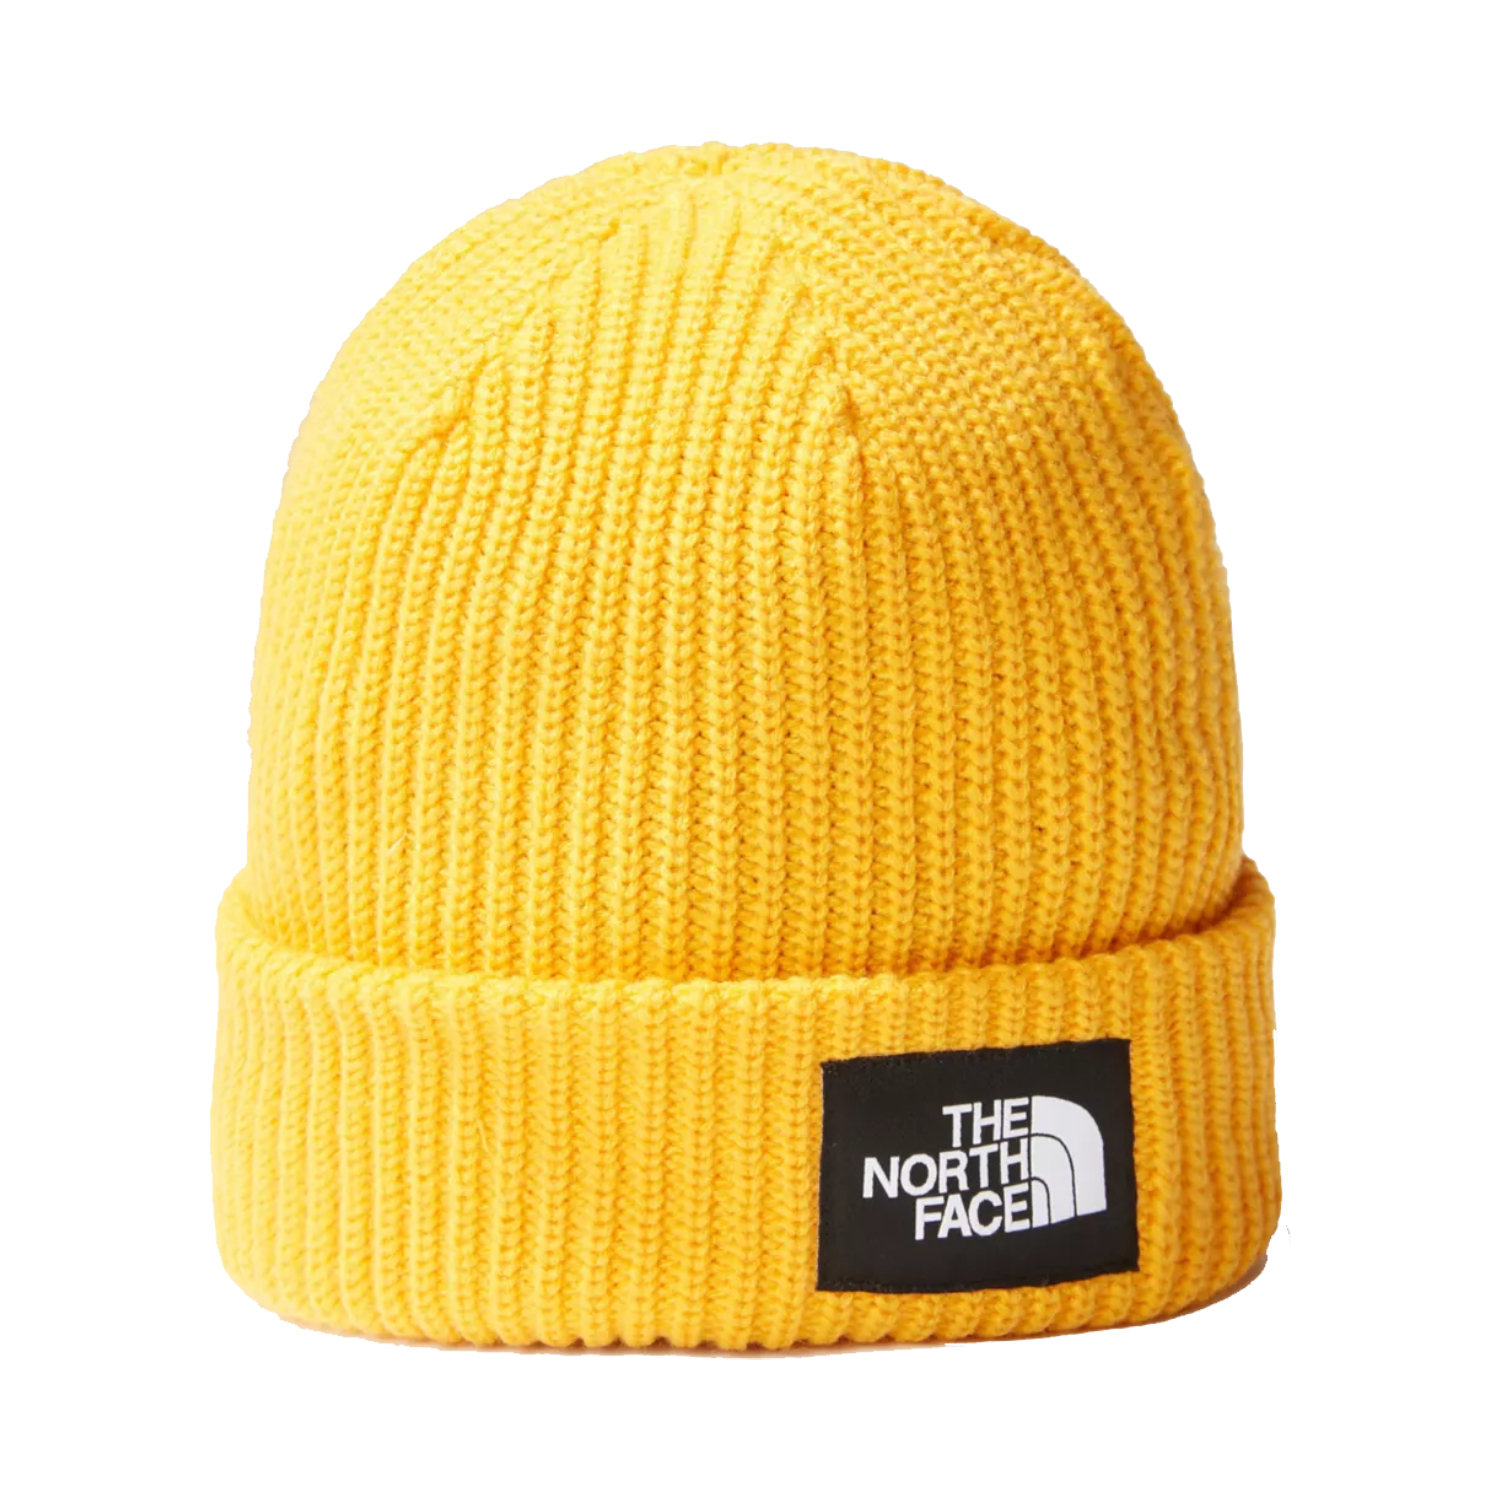 Czapka The North Face Salty Dog Beanie summit gold - ONE SIZE